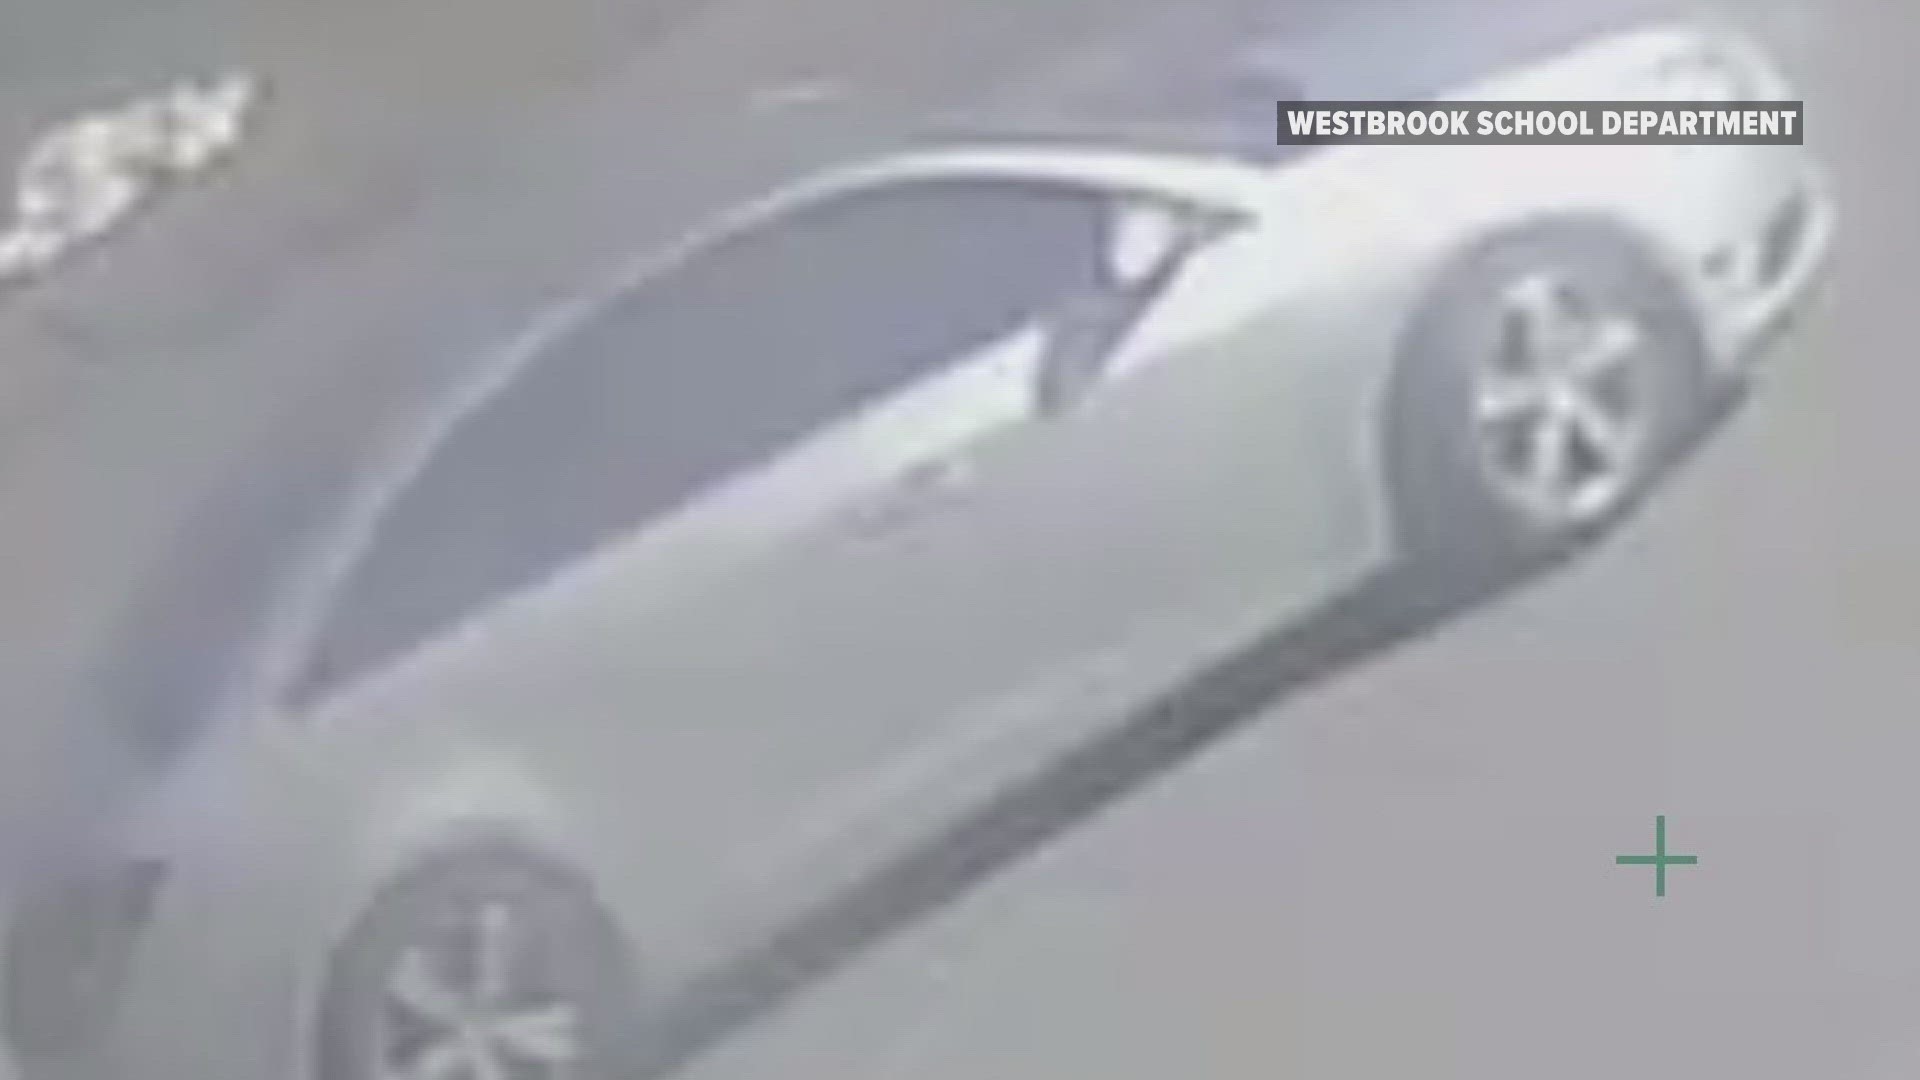 Police say the man was driving a silver sedan down Monroe Avenue Tuesday afternoon when he began following the student.